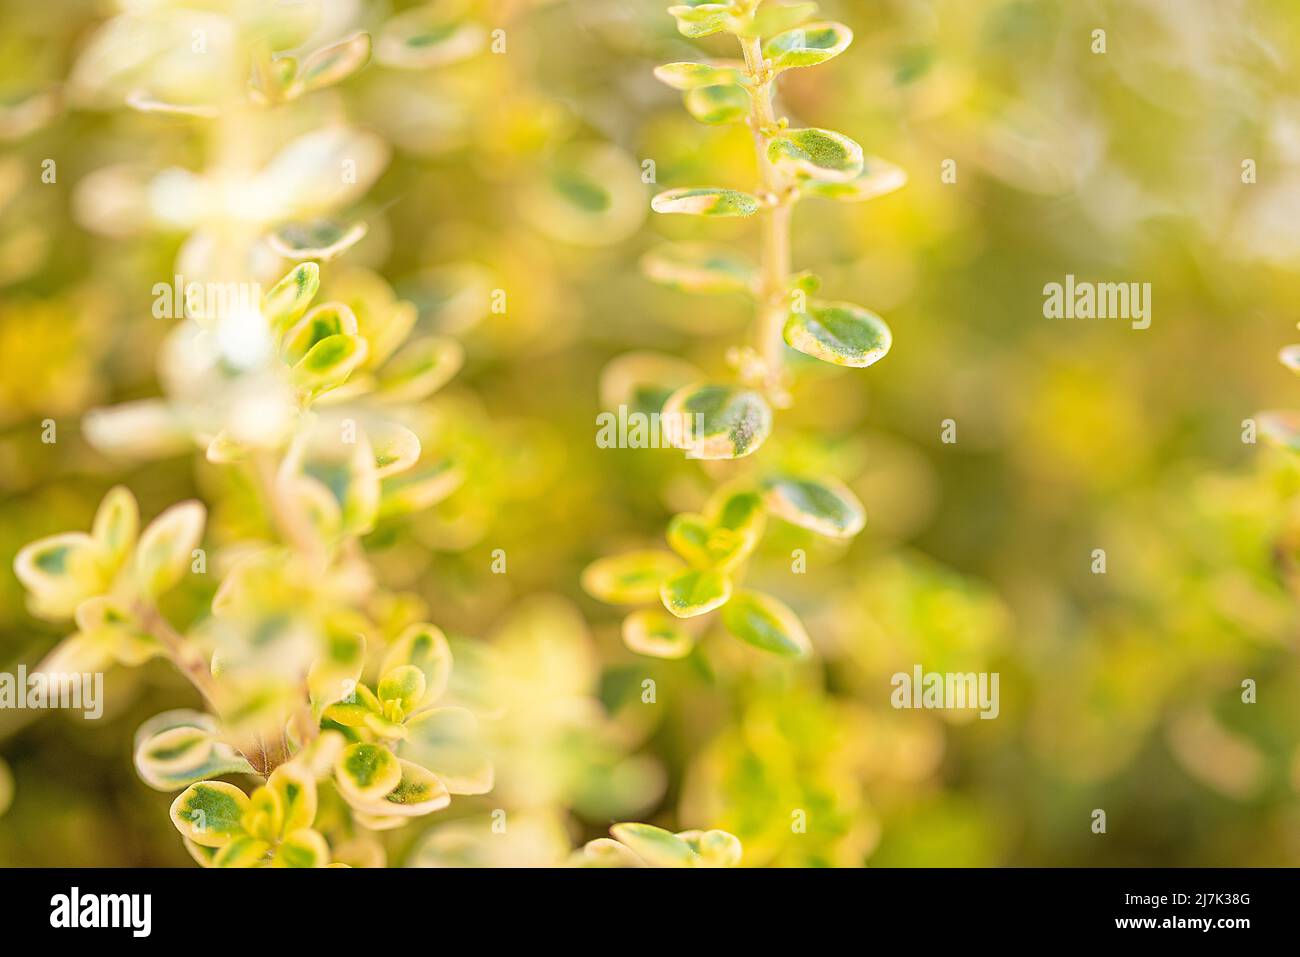 blurry green plant background, close-up view of thyme plant. Stock Photo